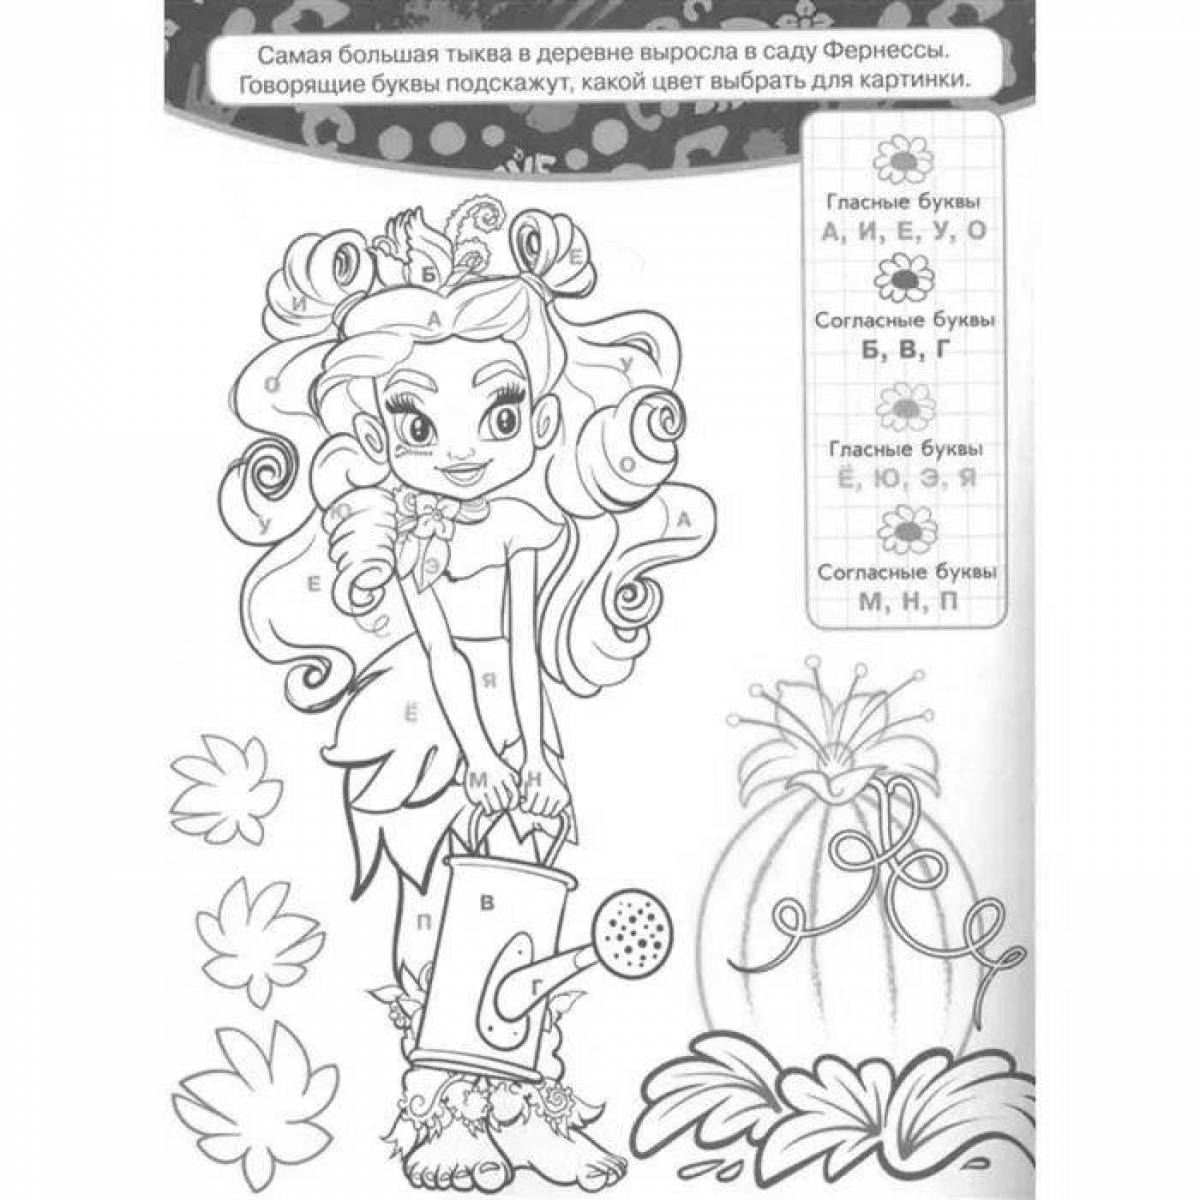 Splendid cave club coloring page